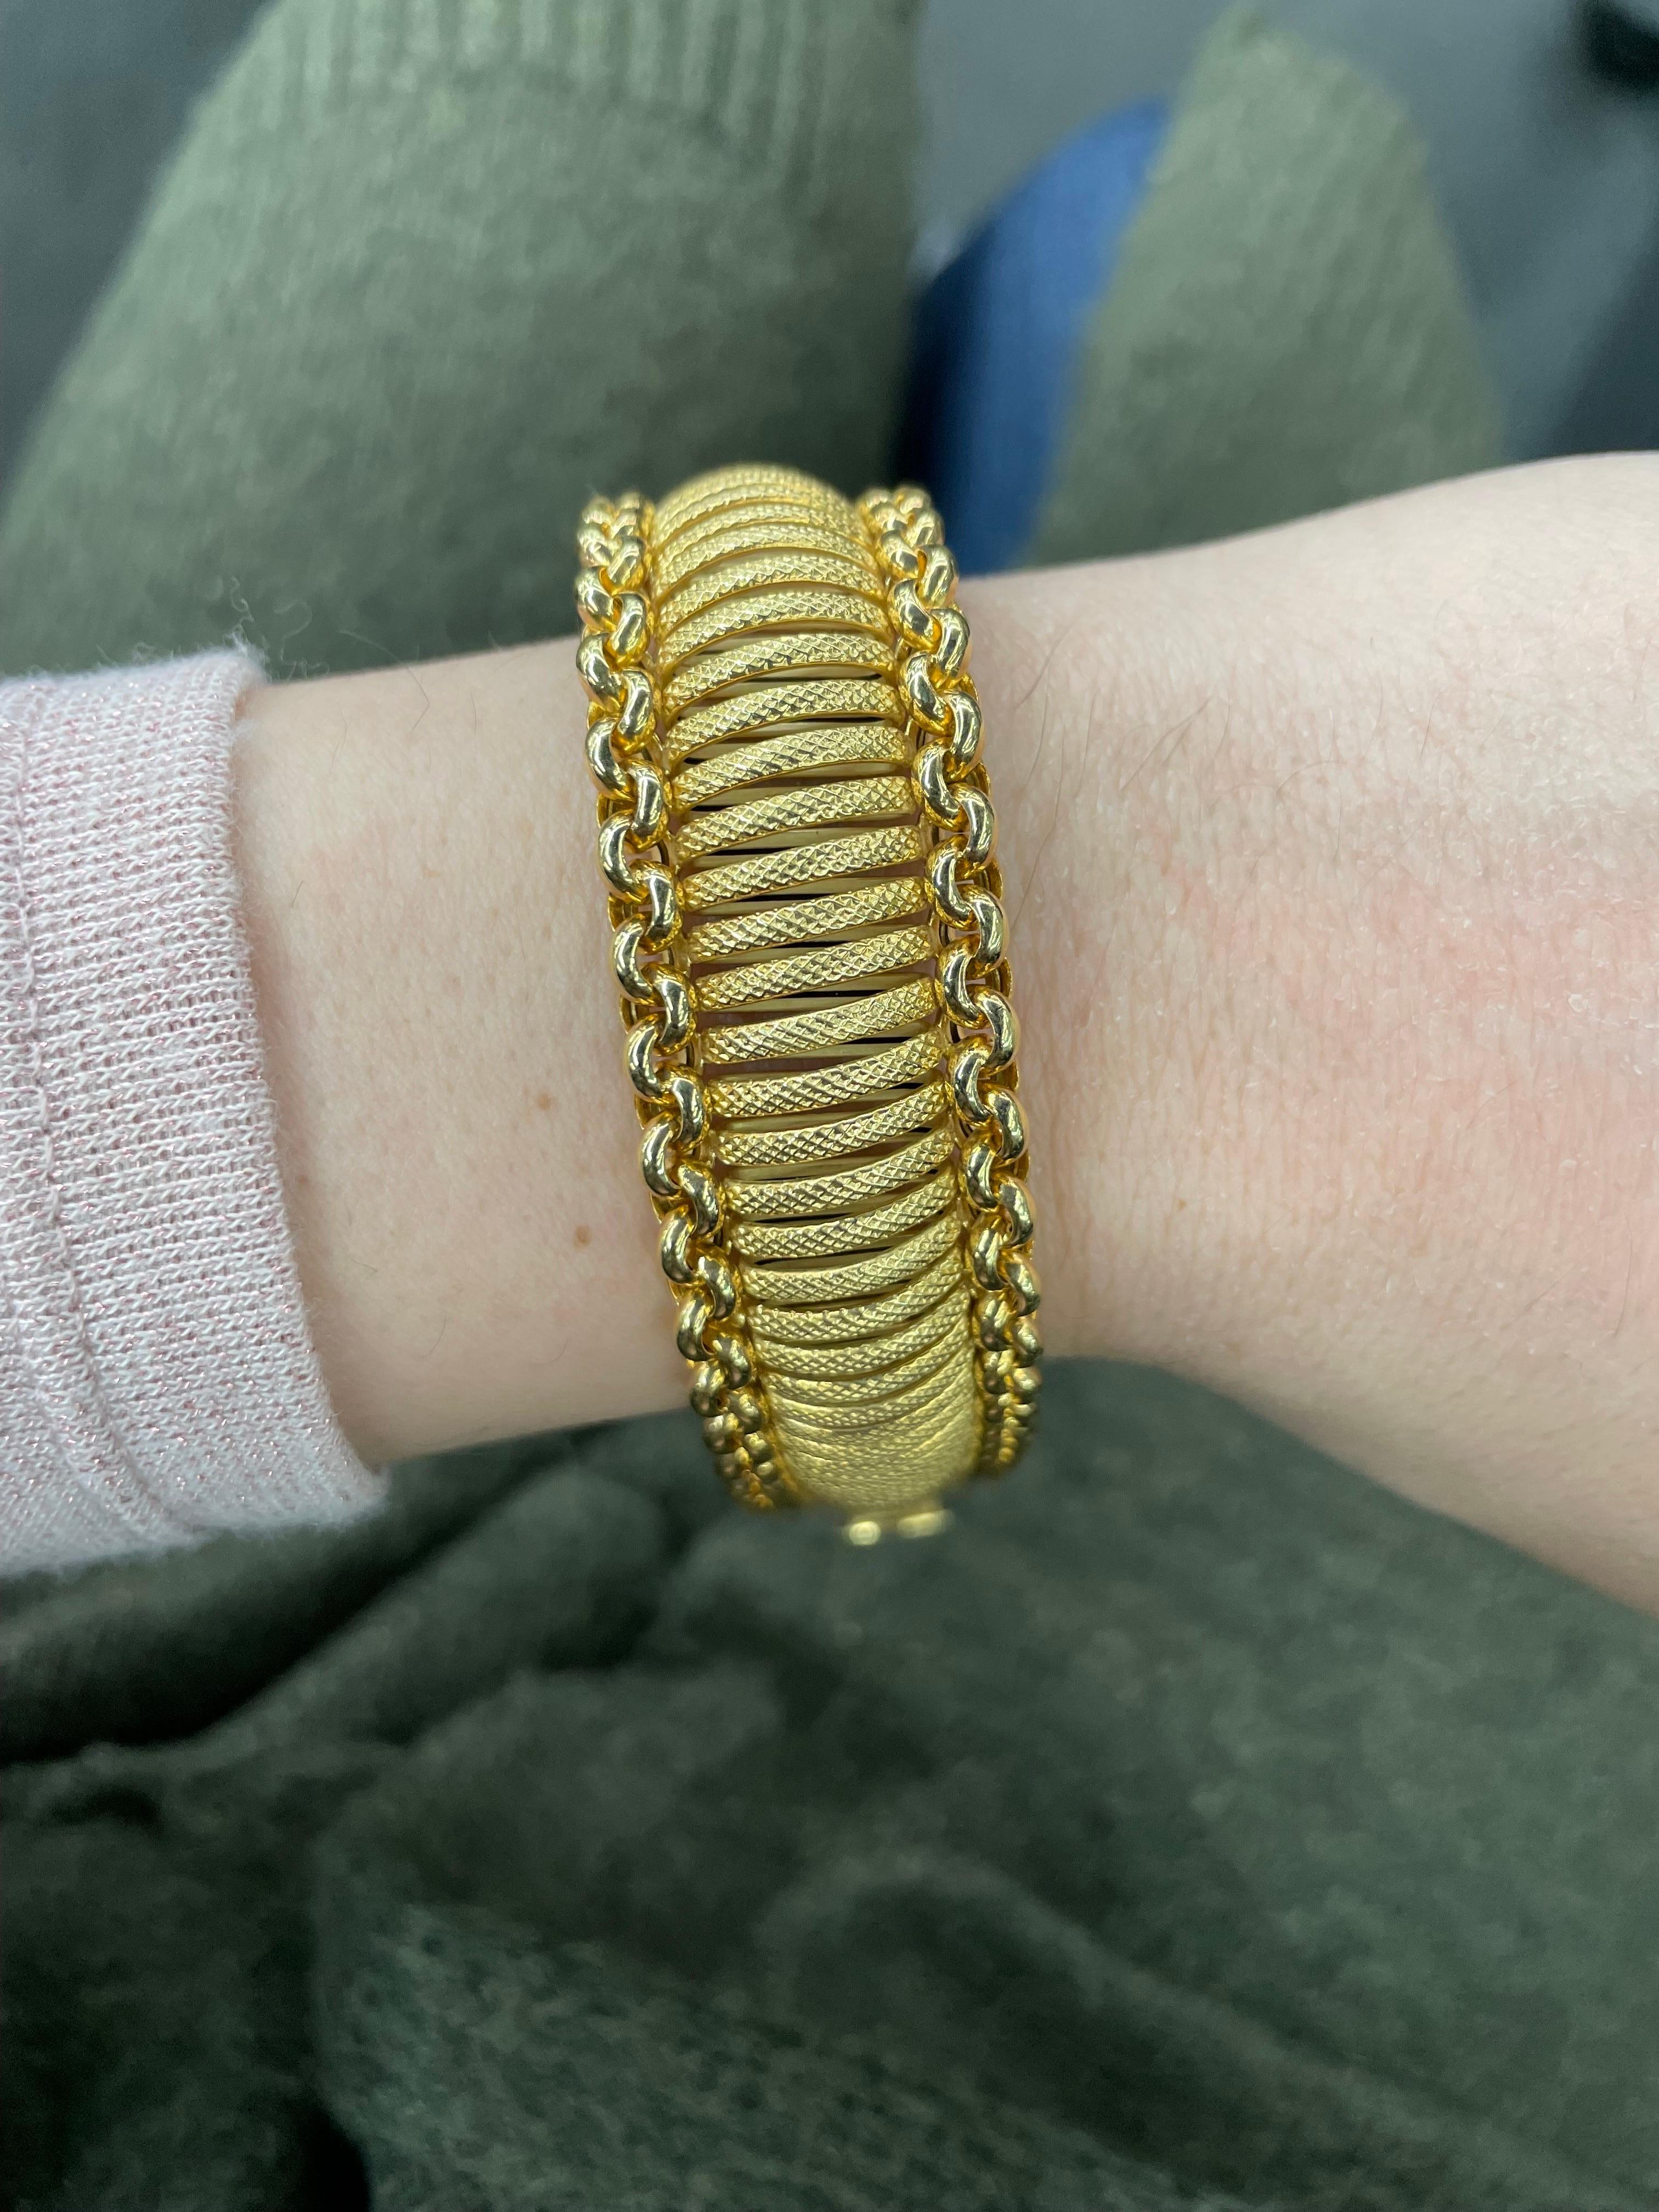 Contemporary Flexible Wide Bracelet 14 Karat Yellow Gold Made In Italy 32.2 Grams For Sale